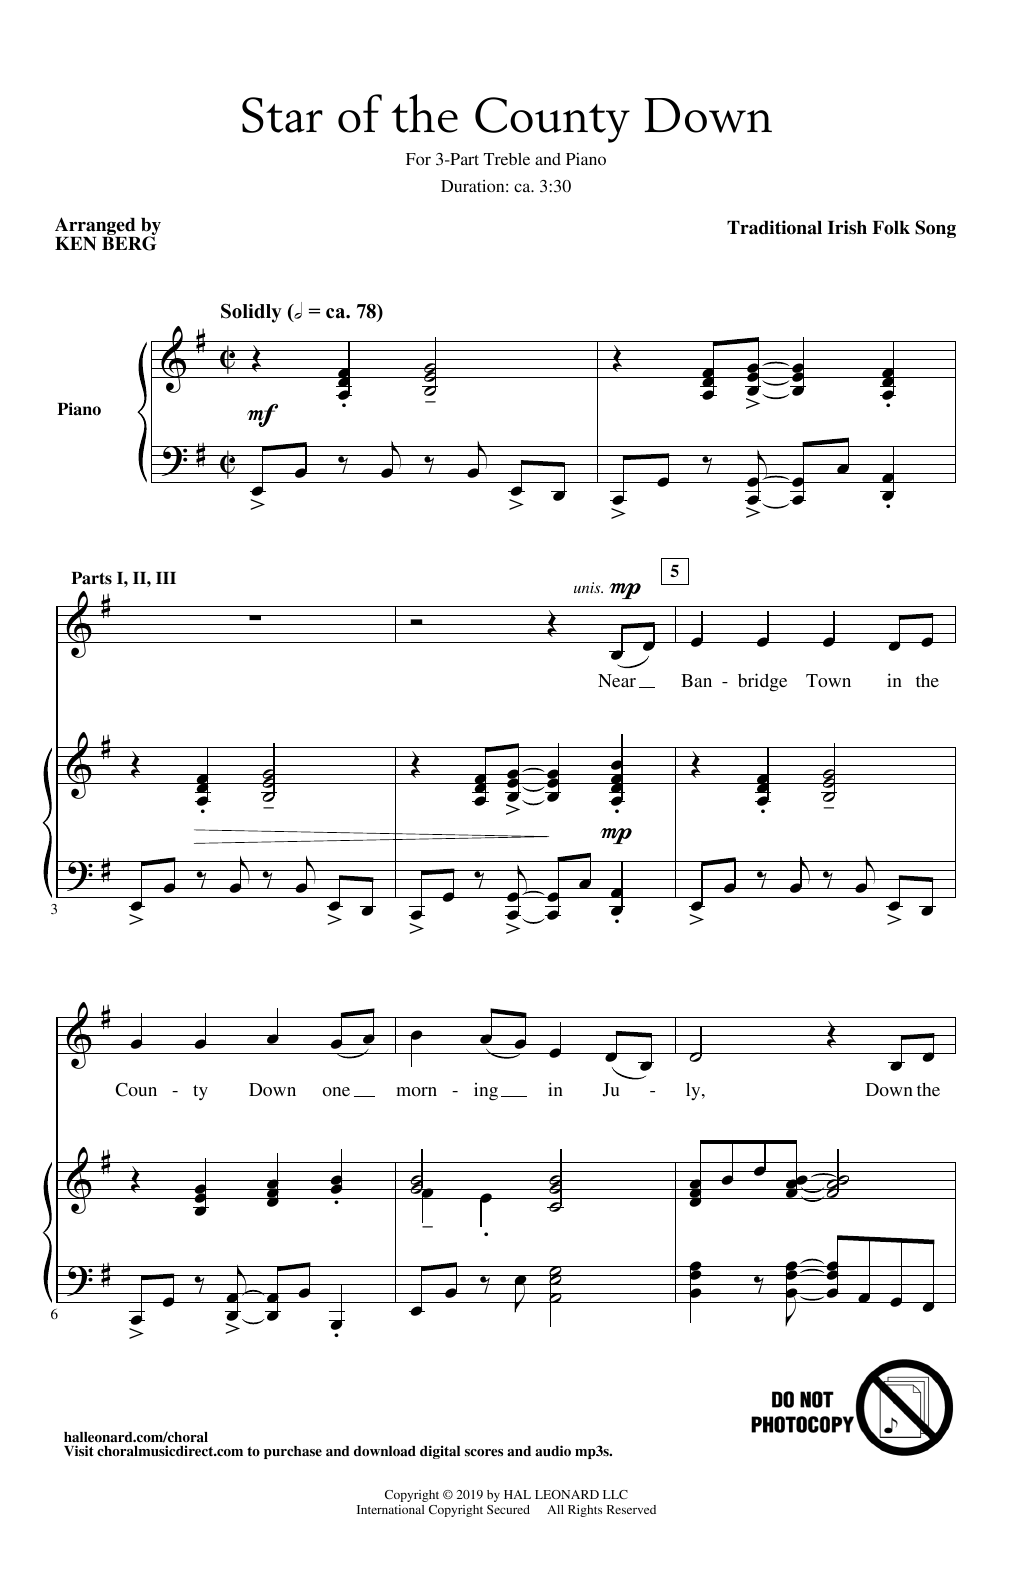 Download Traditional Irish Folk Song Star Of The County Down (arr. Ken Berg) Sheet Music